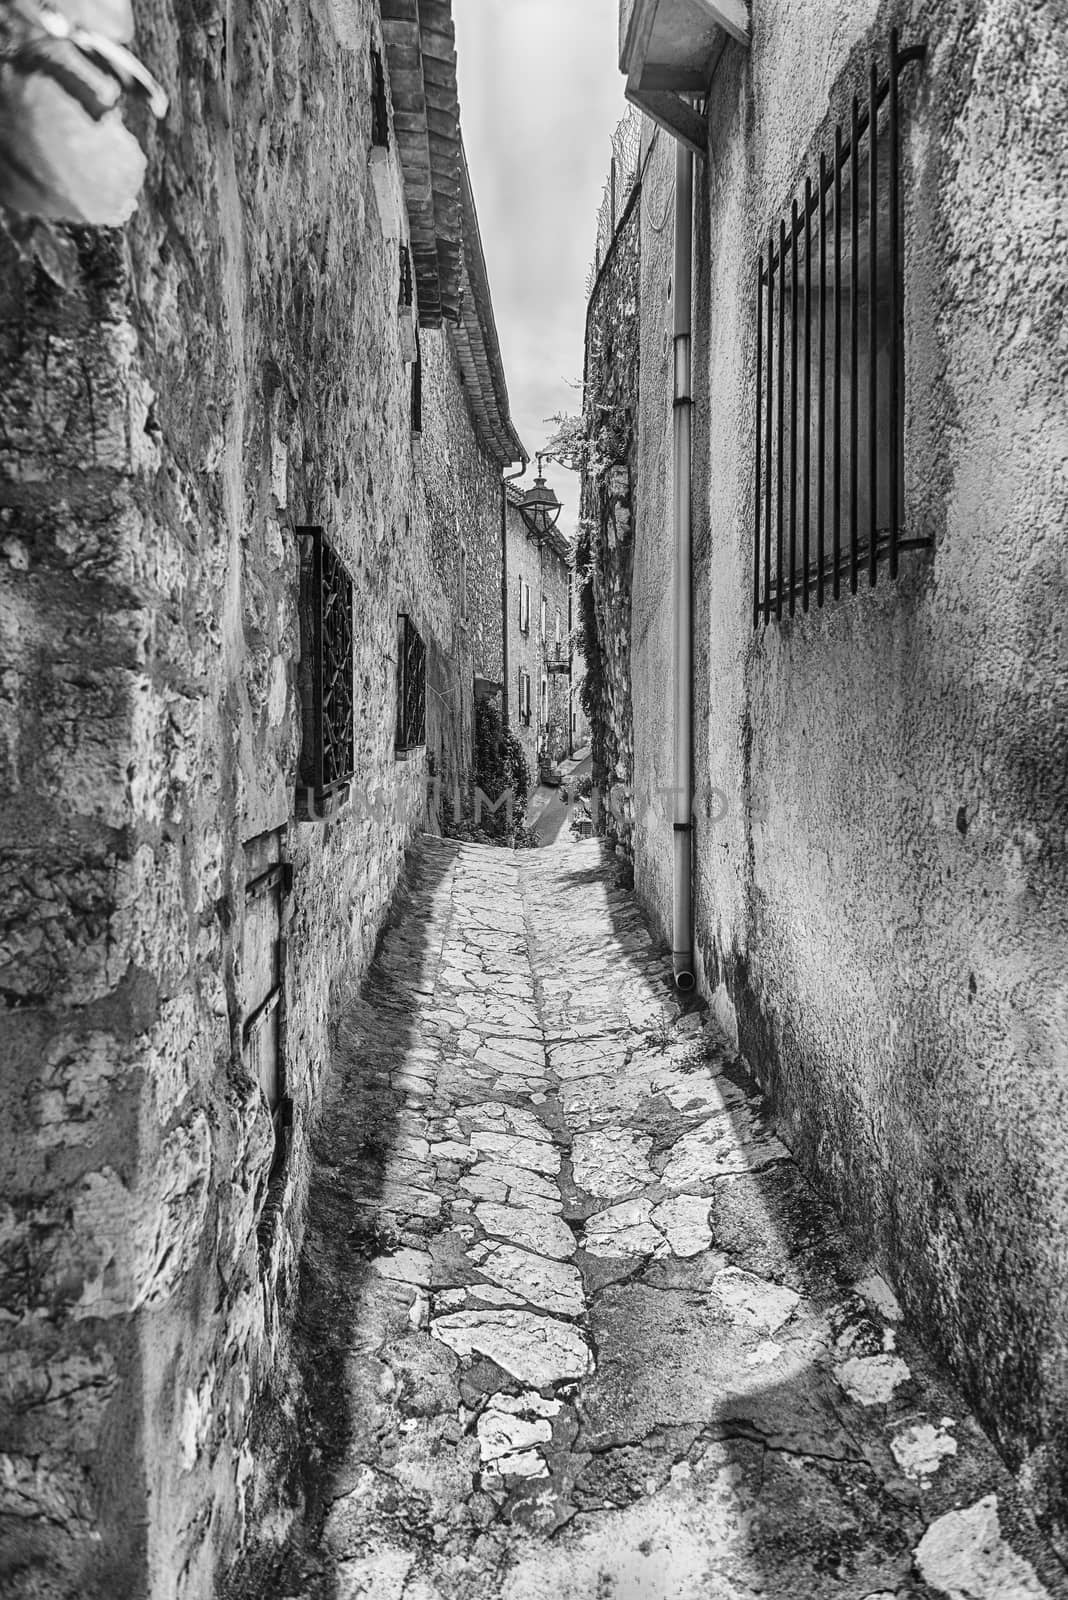 Walking in the picturesque streets of Saint-Paul-de-Vence, Cote d'Azur, France. It is one of the oldest medieval towns on the French Riviera